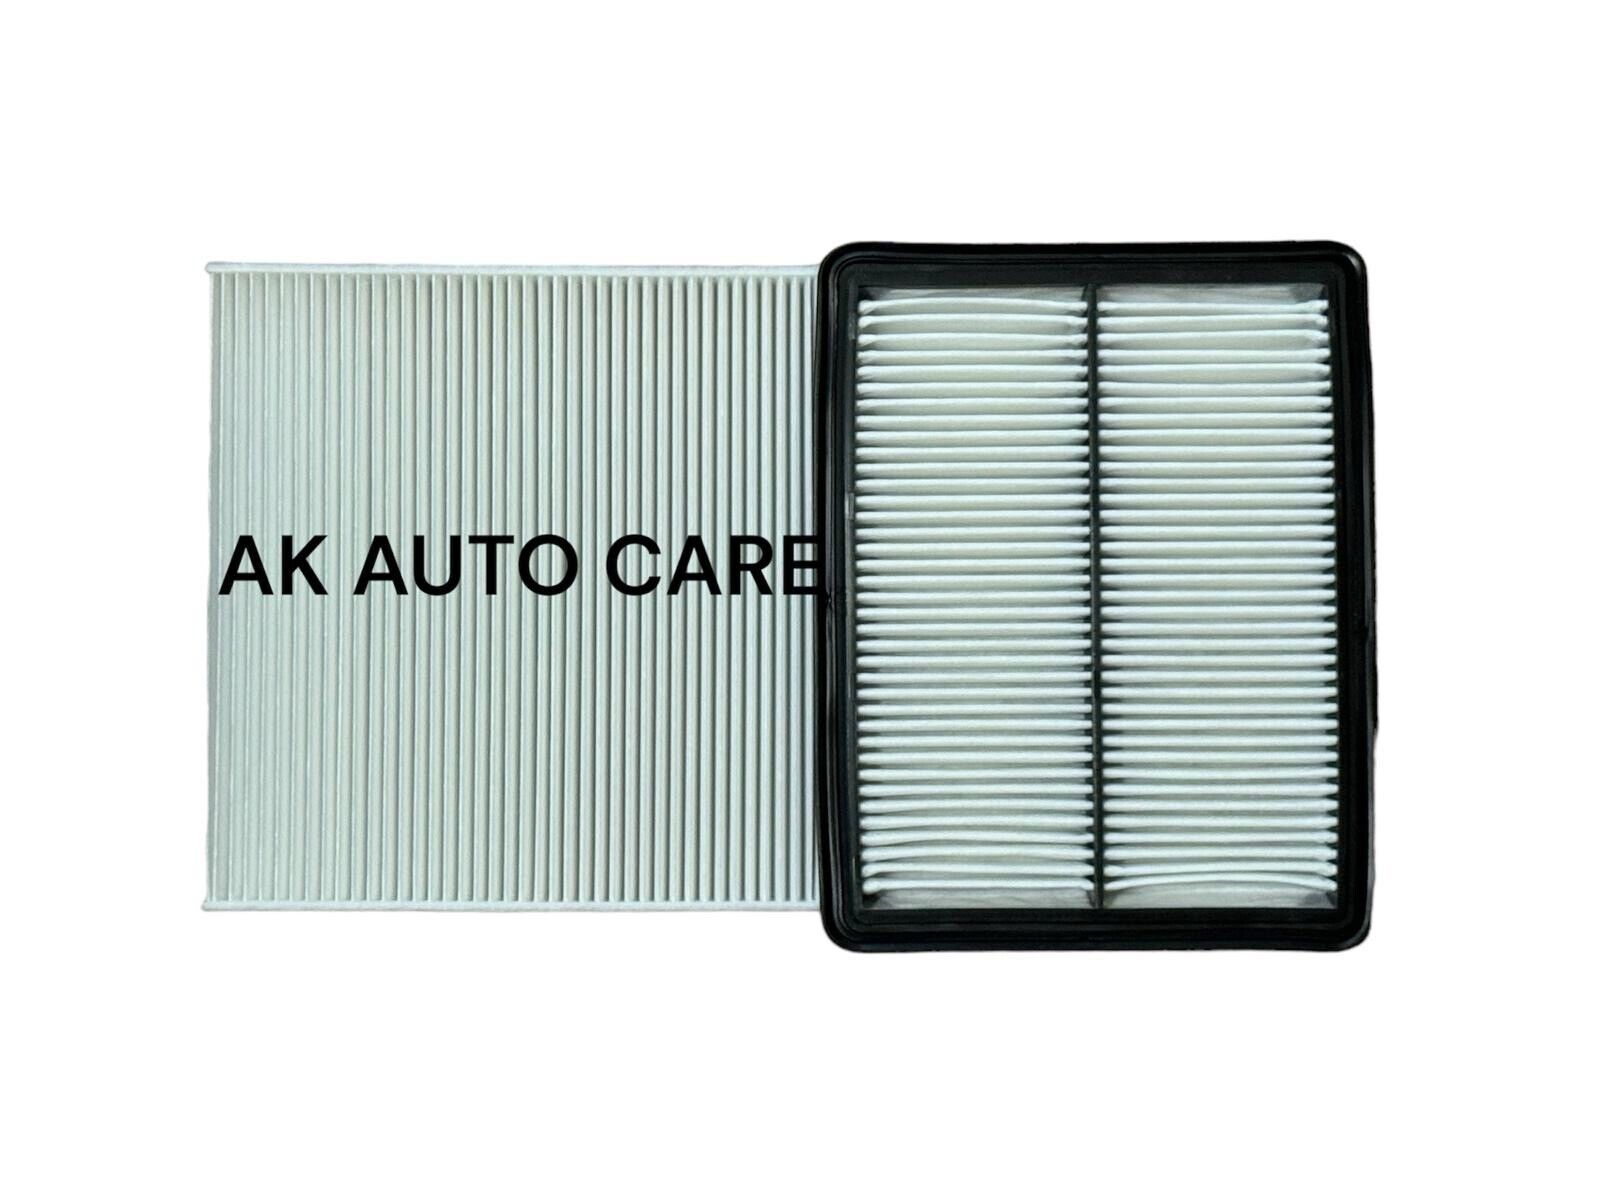 ENGINE AND CABIN AIR FILTER For ACURA TL 2009-2014 HONDA ACCORD 2008-2012 V6 